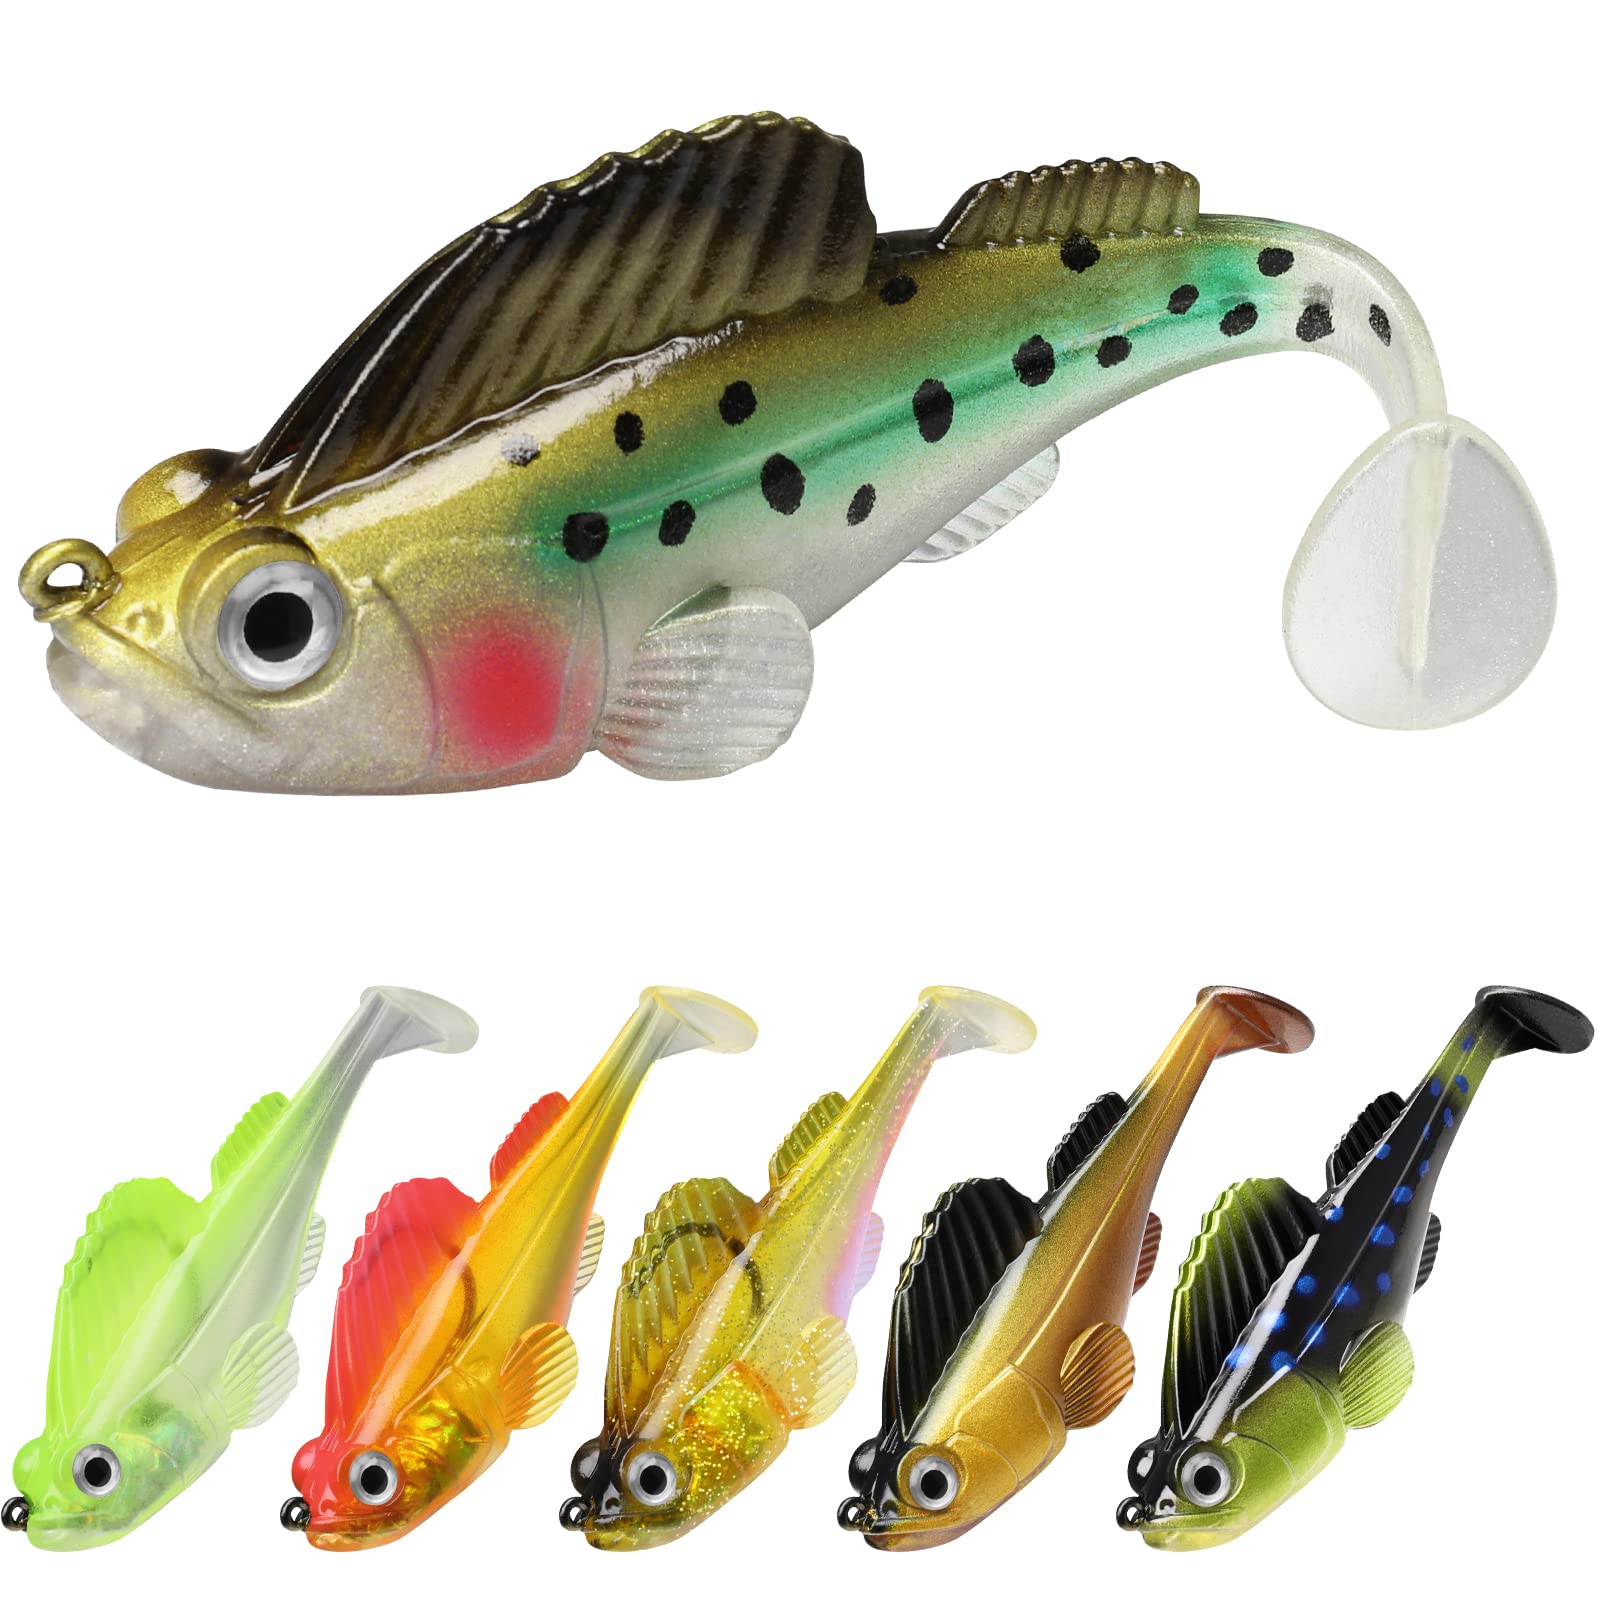 Goture Lead Head Jigs Soft Fishing Lures with Hook Sinking Swimbaits for  Saltwater and Freshwater (Pack of 5) : Buy Online at Best Price in KSA -  Souq is now : Sporting Goods